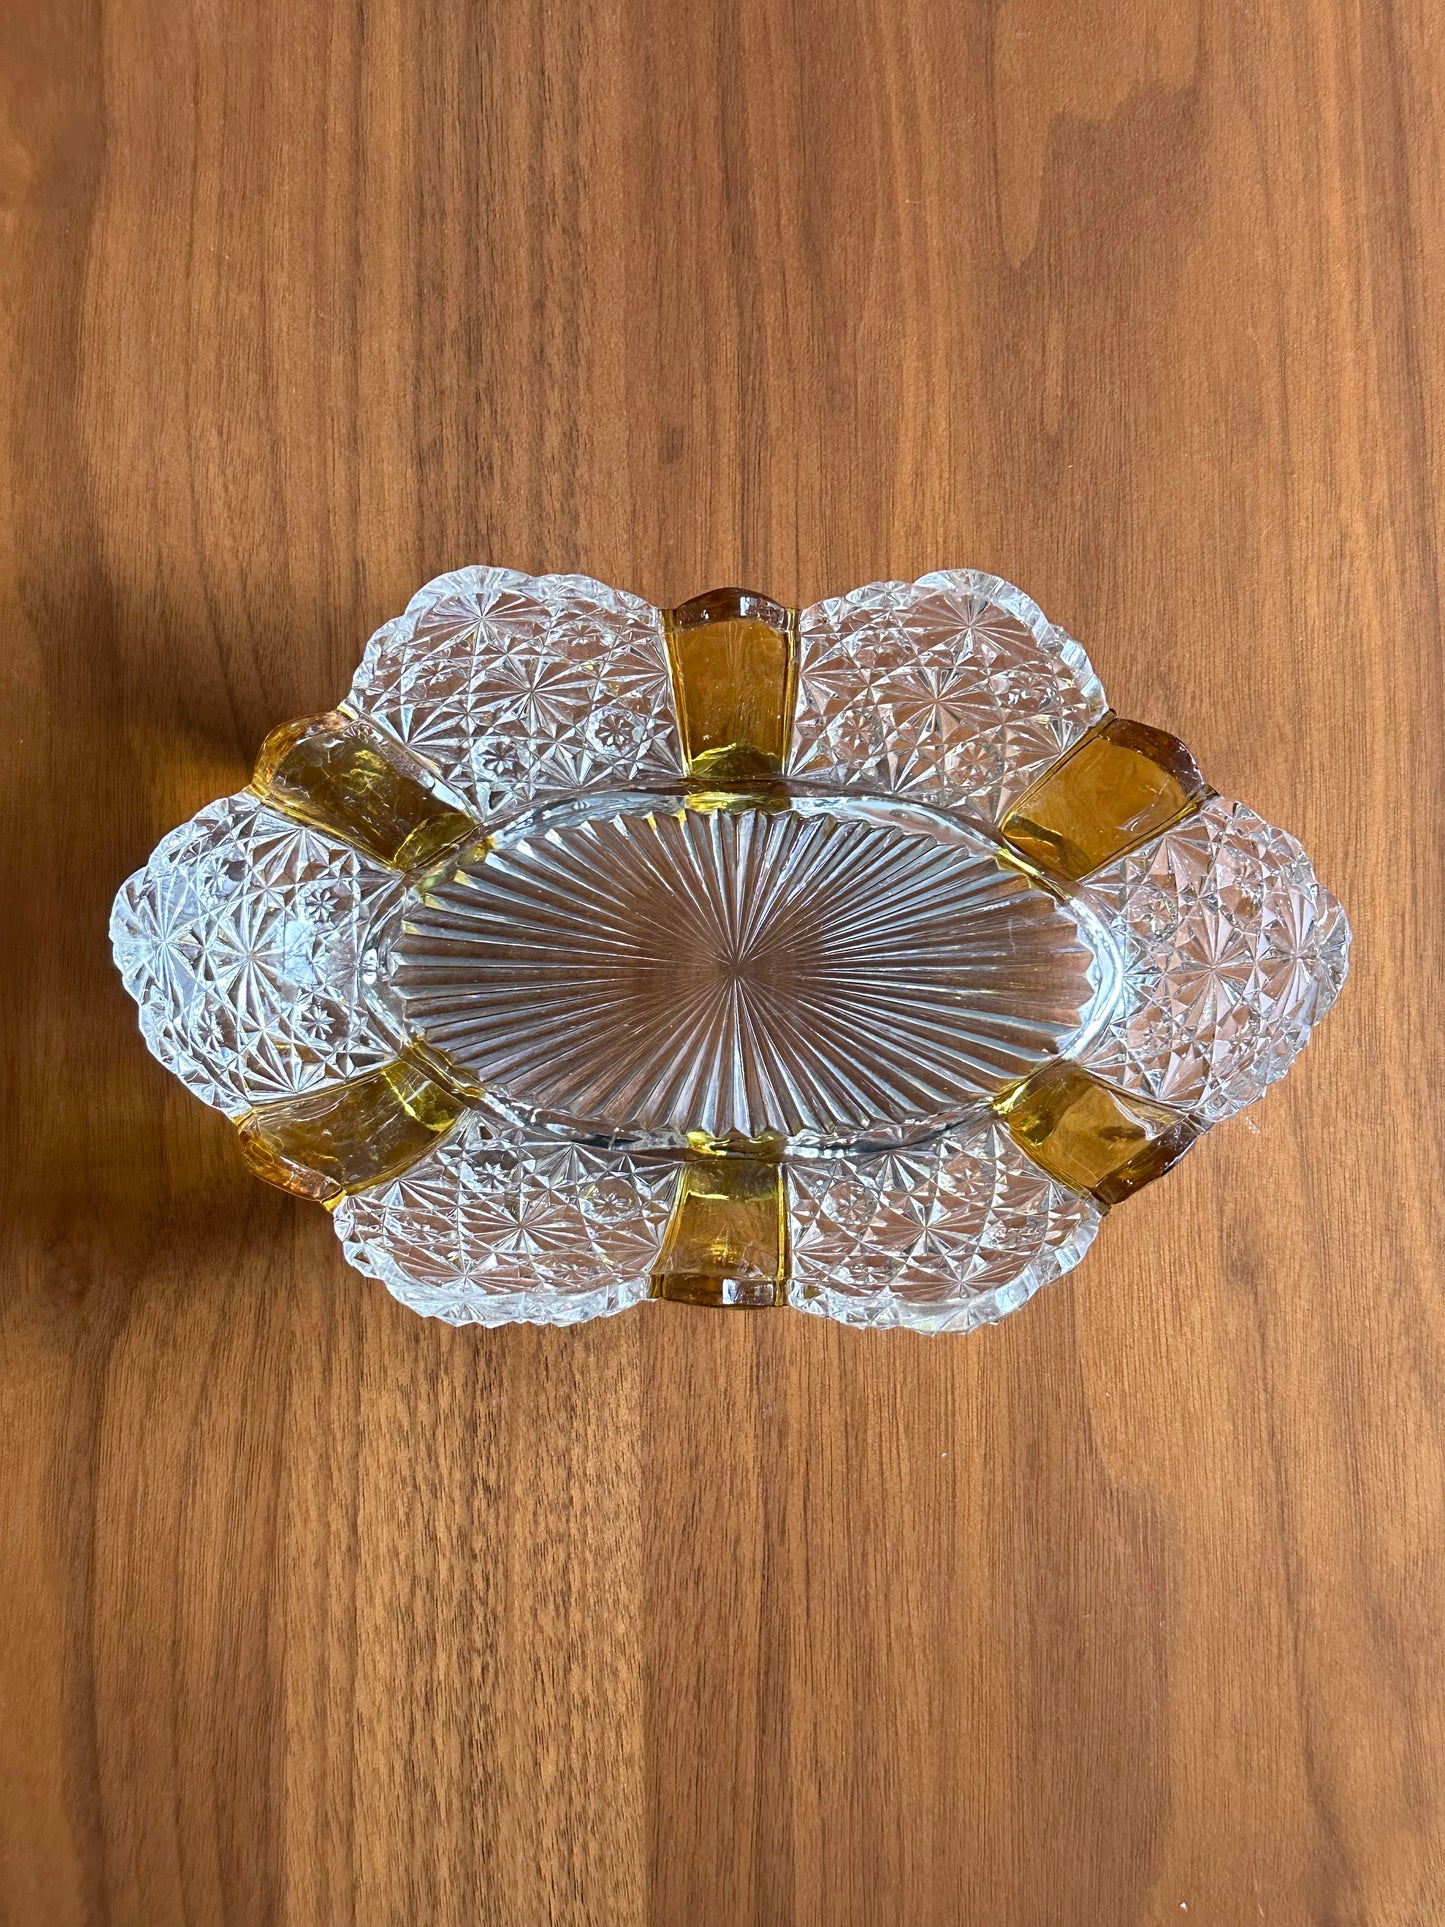 Duncan & Miller Ellrose Amberette Daisy and Button Oval Bowl